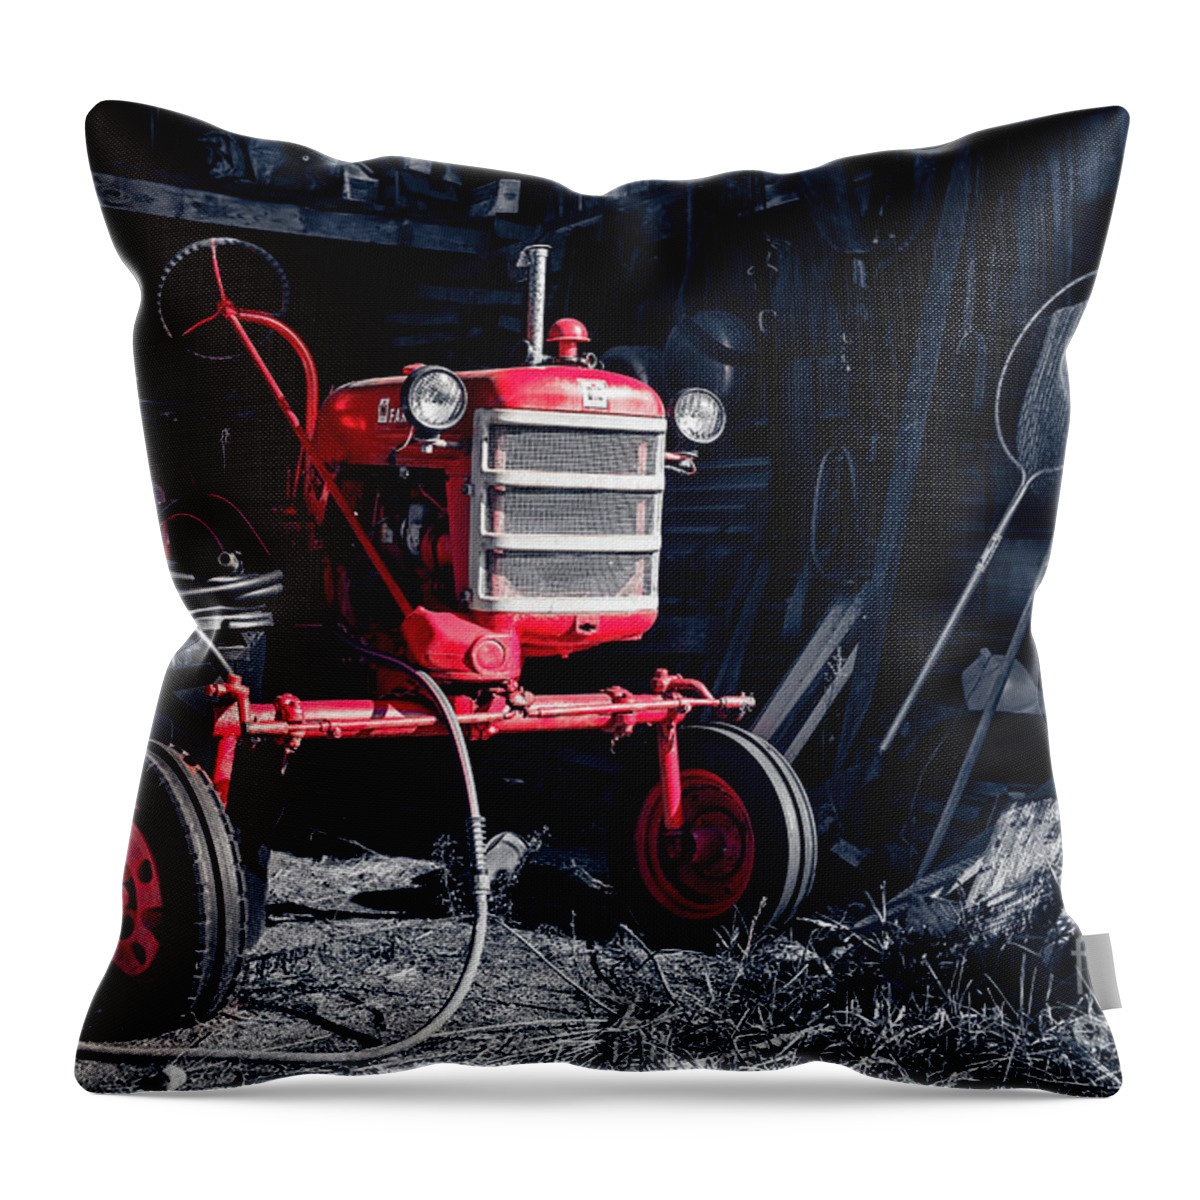 Hardwick Throw Pillow featuring the photograph Old Farmall Vintage Tractor in the Barn by Edward Fielding